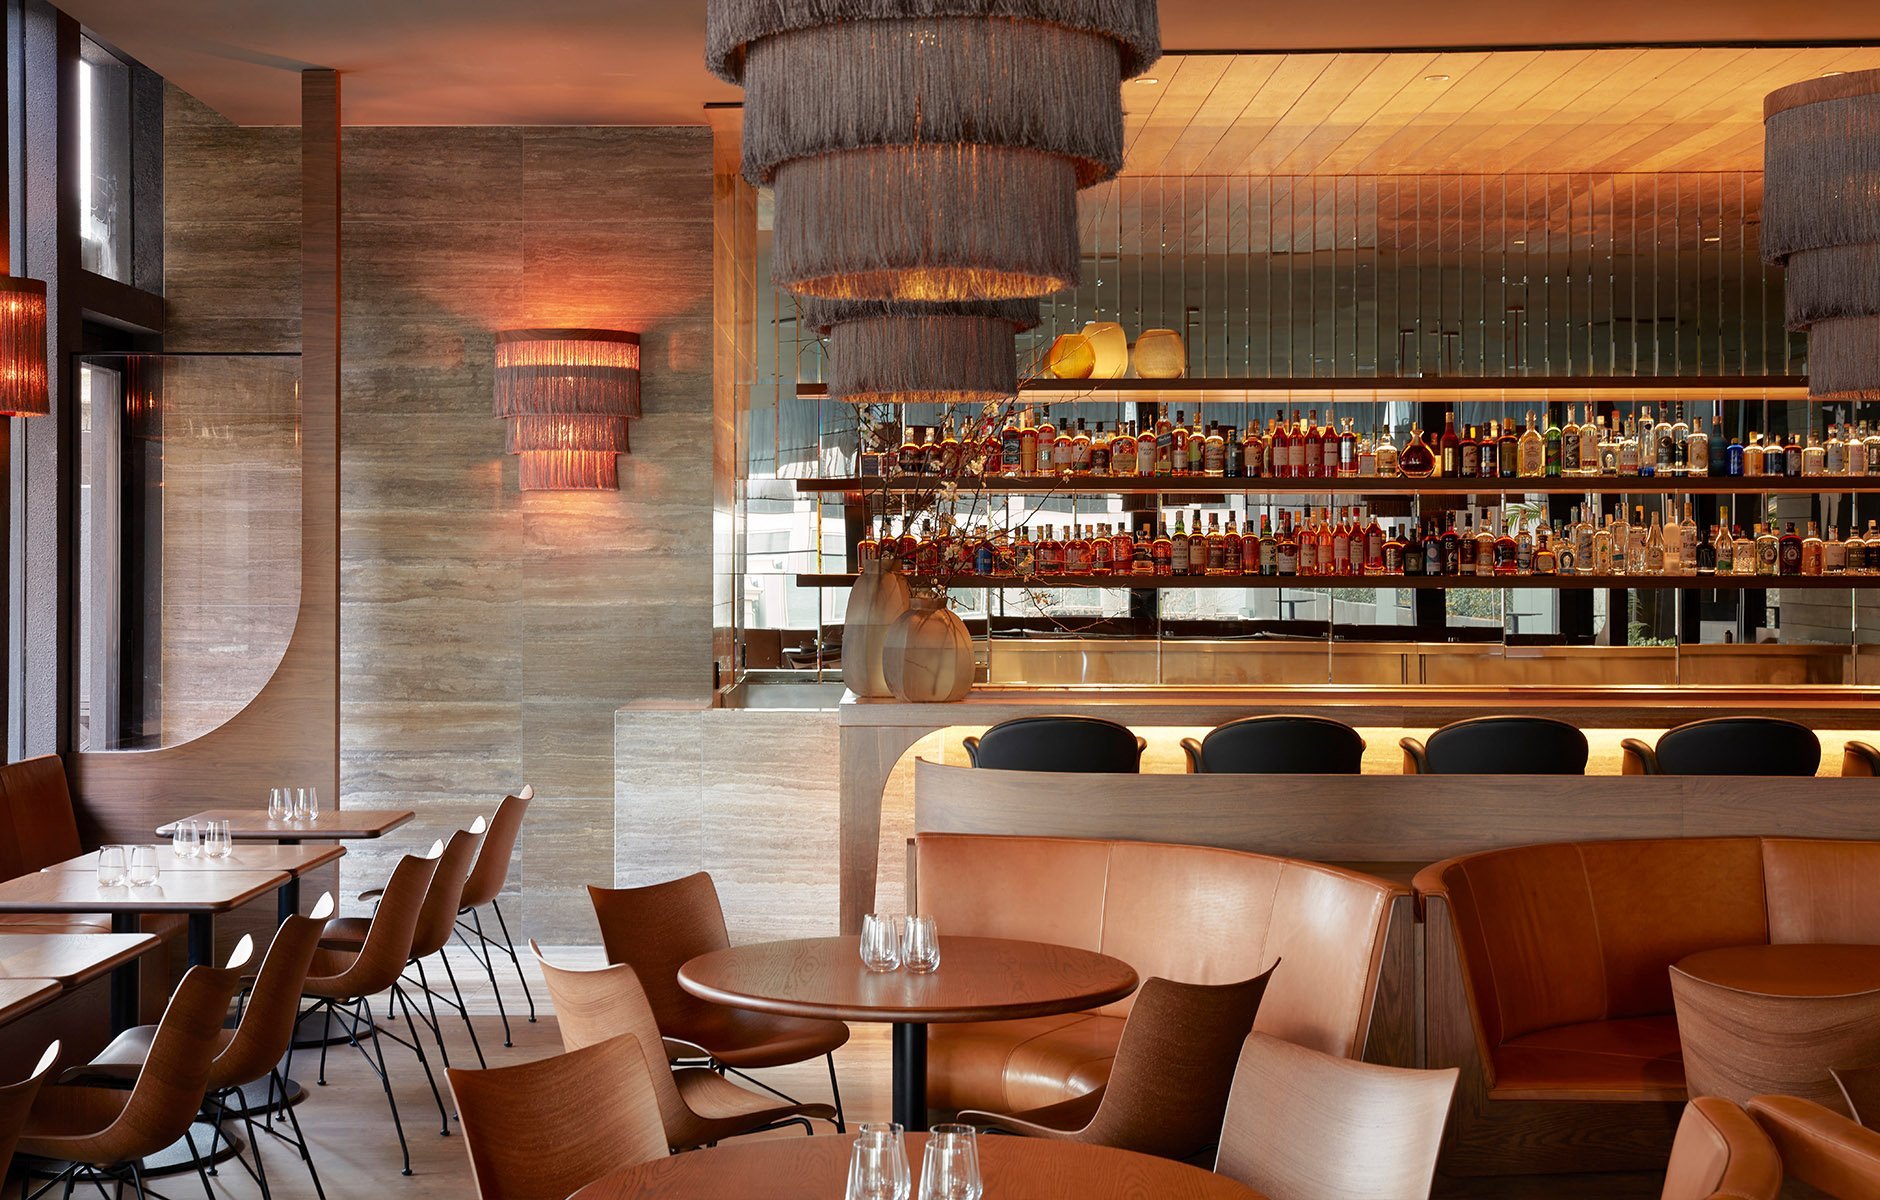 The Lillian Terrace @societyrestaurant and its relaxed dining experience features the soft curves of the P/Wood chair designed by Philippe Starck for Kartell. Photo © Sean Fennessy @seanfennessy.